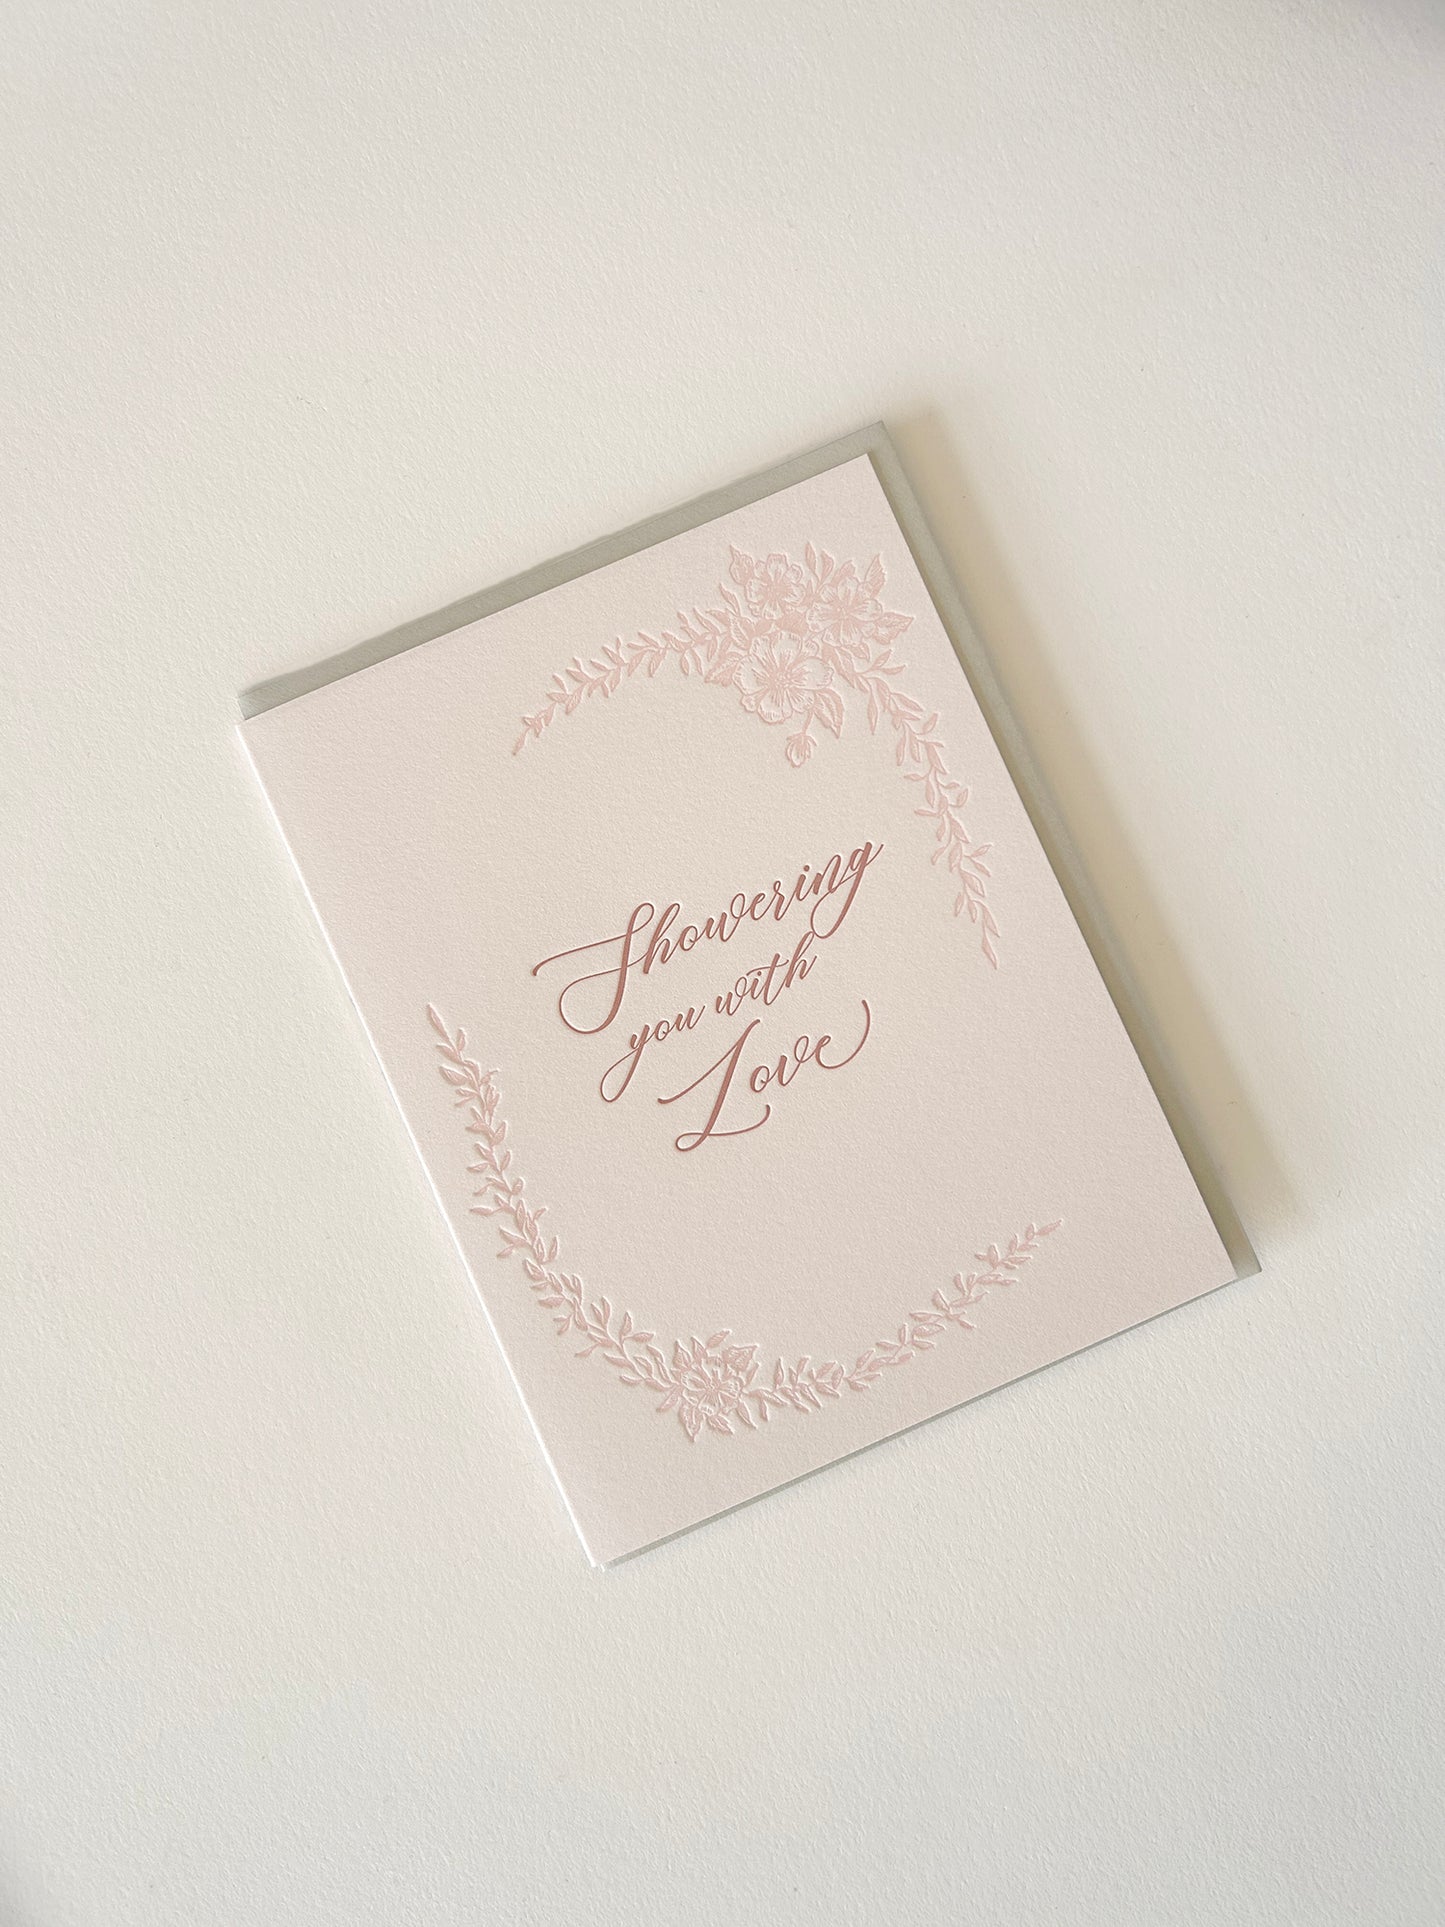 Showering You With Love Letterpress Greeting Card